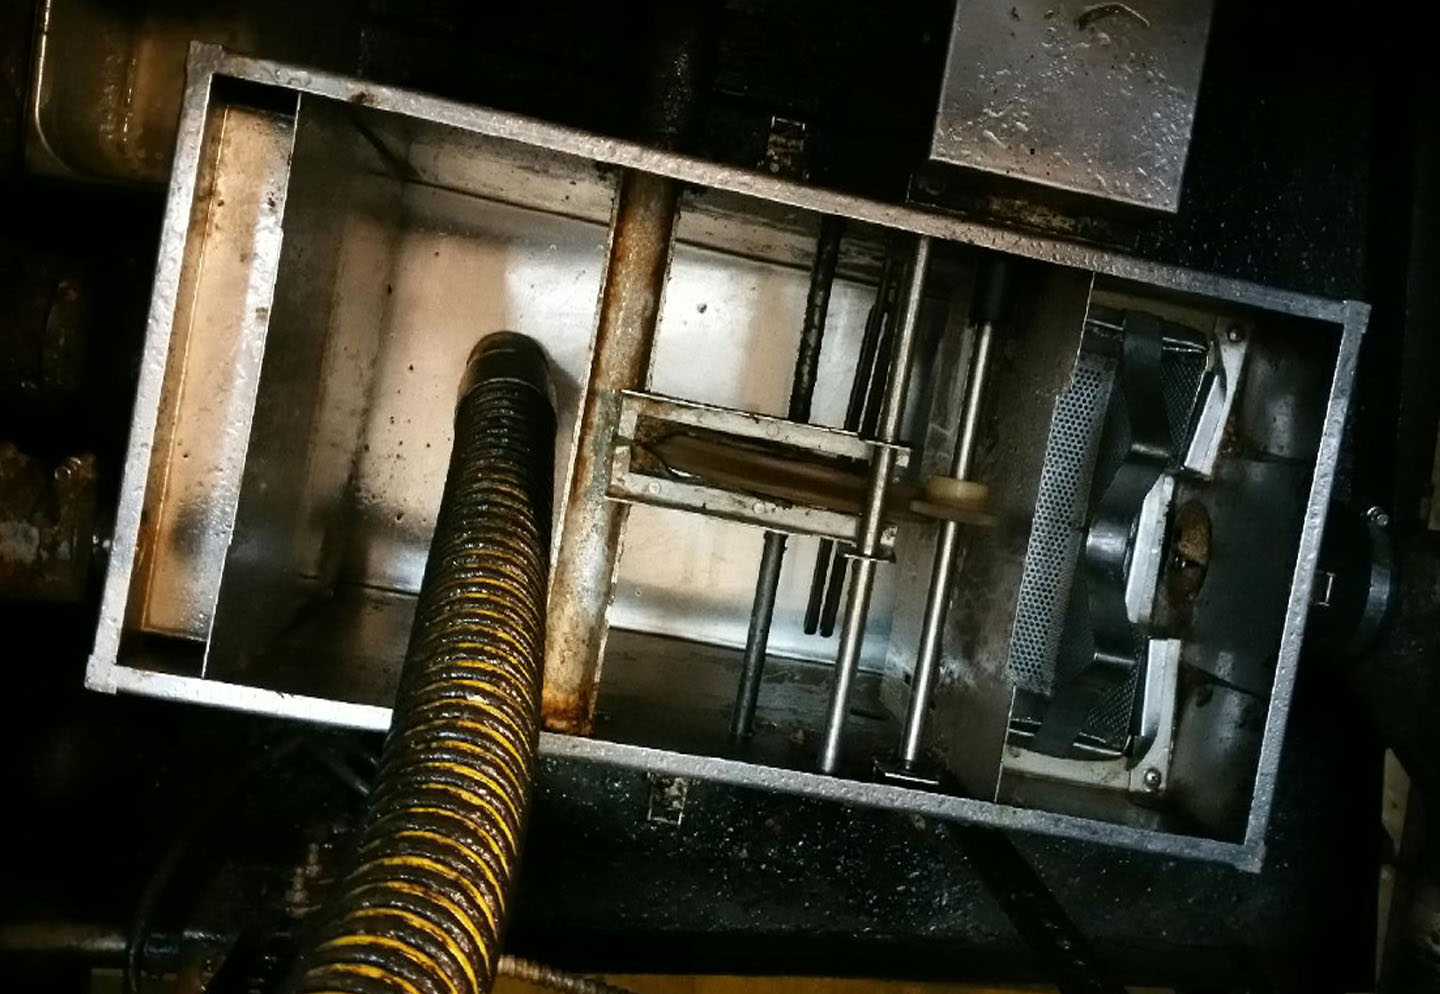 Grease Trap Pumping and Cleaning Service Company. Complete Removal of All FOGS (FATS, OILS, GREASE, and SOLIDs) Waste Preventing it From Entering The City Sanitation Line. 